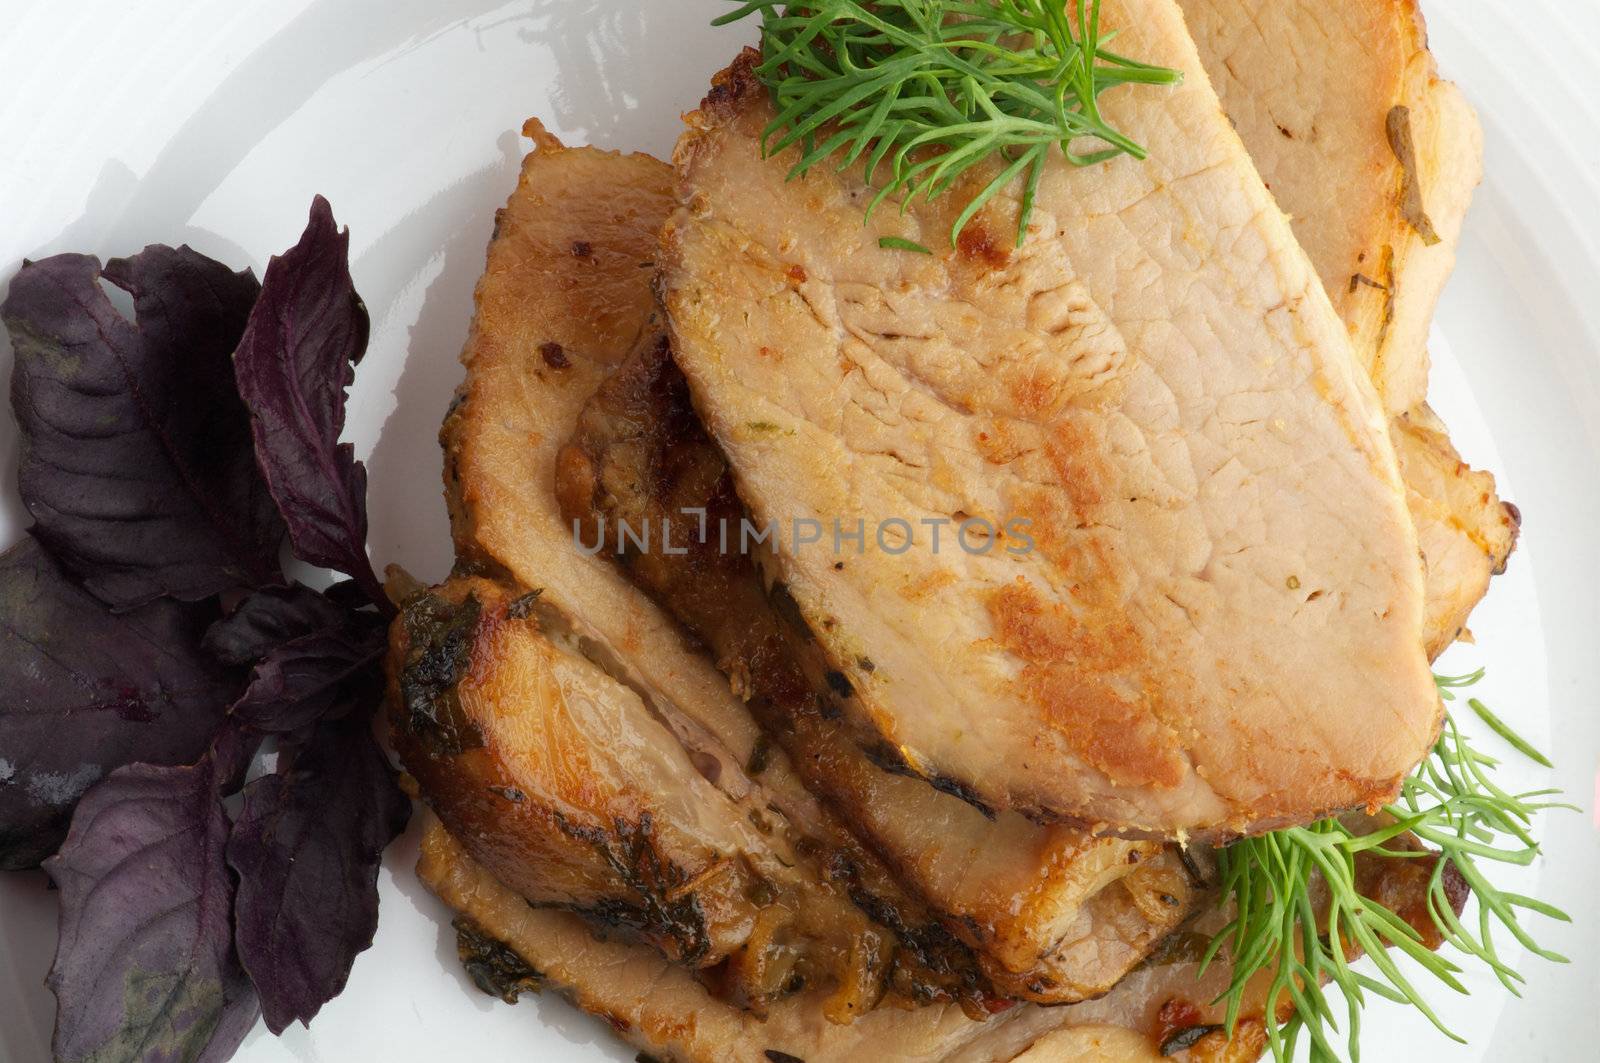 Slices of Ripe Roasted Pork with Greens on white plate top view